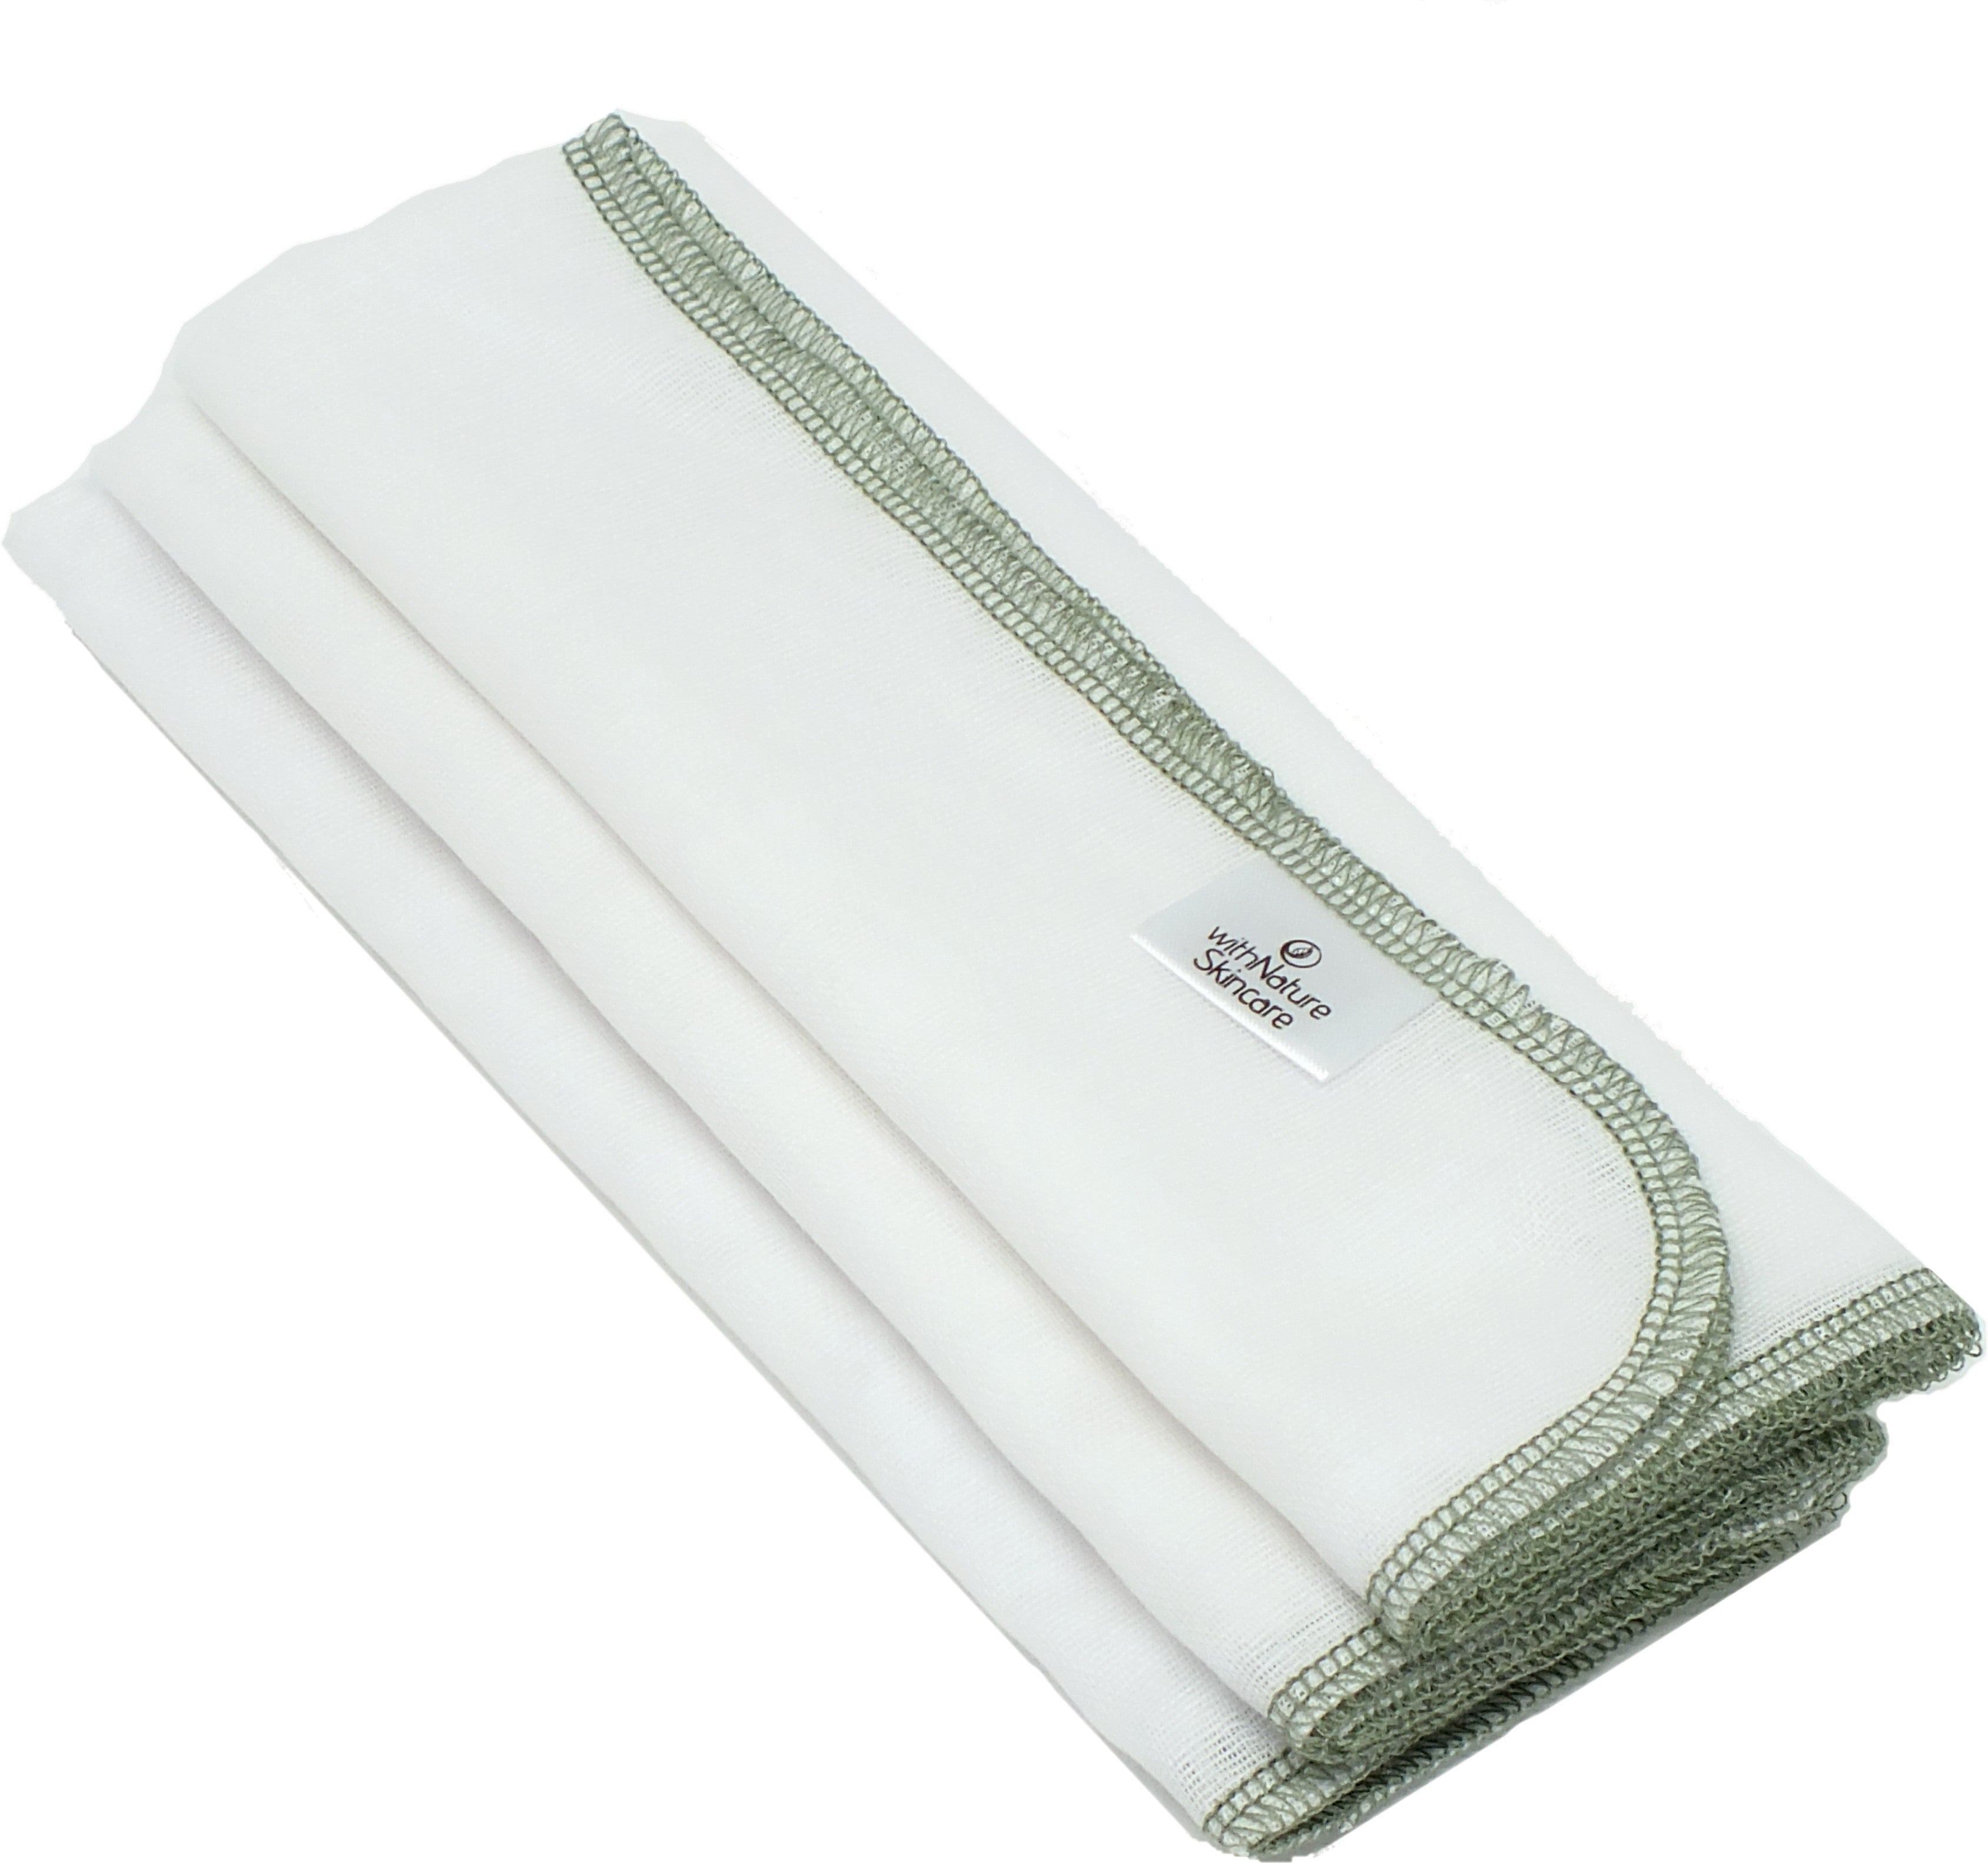 Pure & Gentle Muslin Face Cloths (Pack of 3)